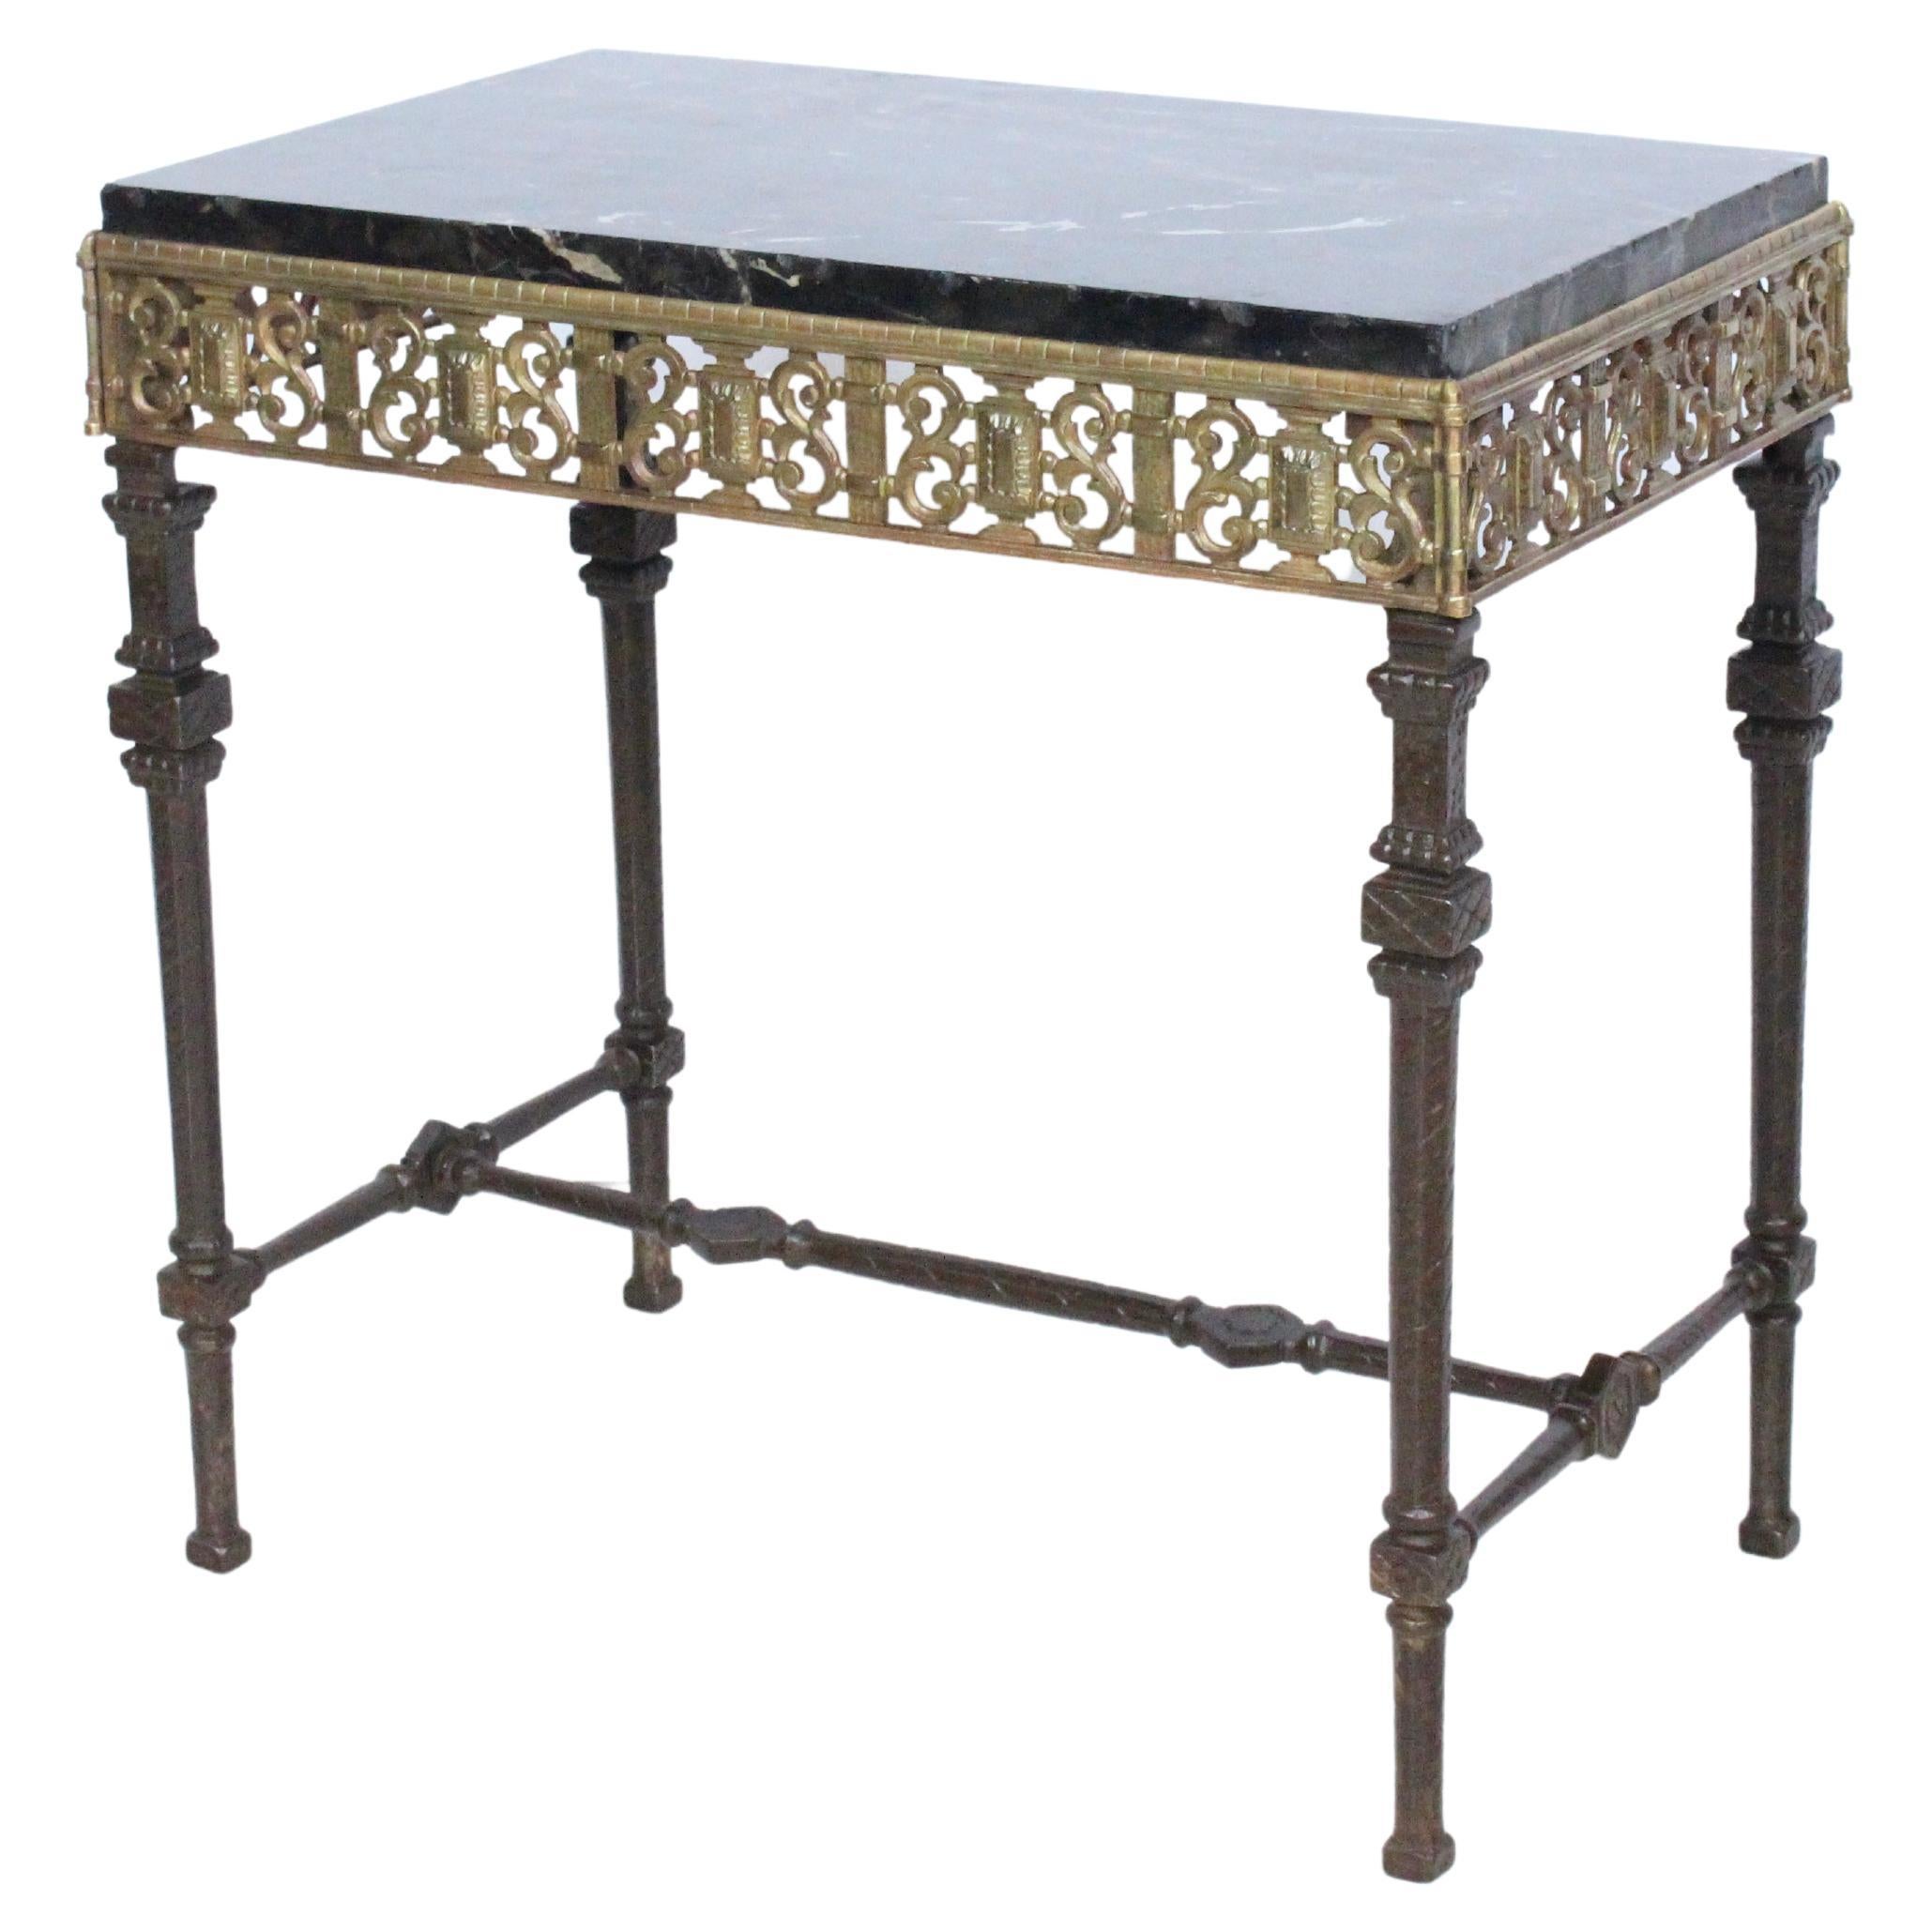 Oscar Bach Style Marble, Burnished Bronze and Iron Occasional Table, 1920s